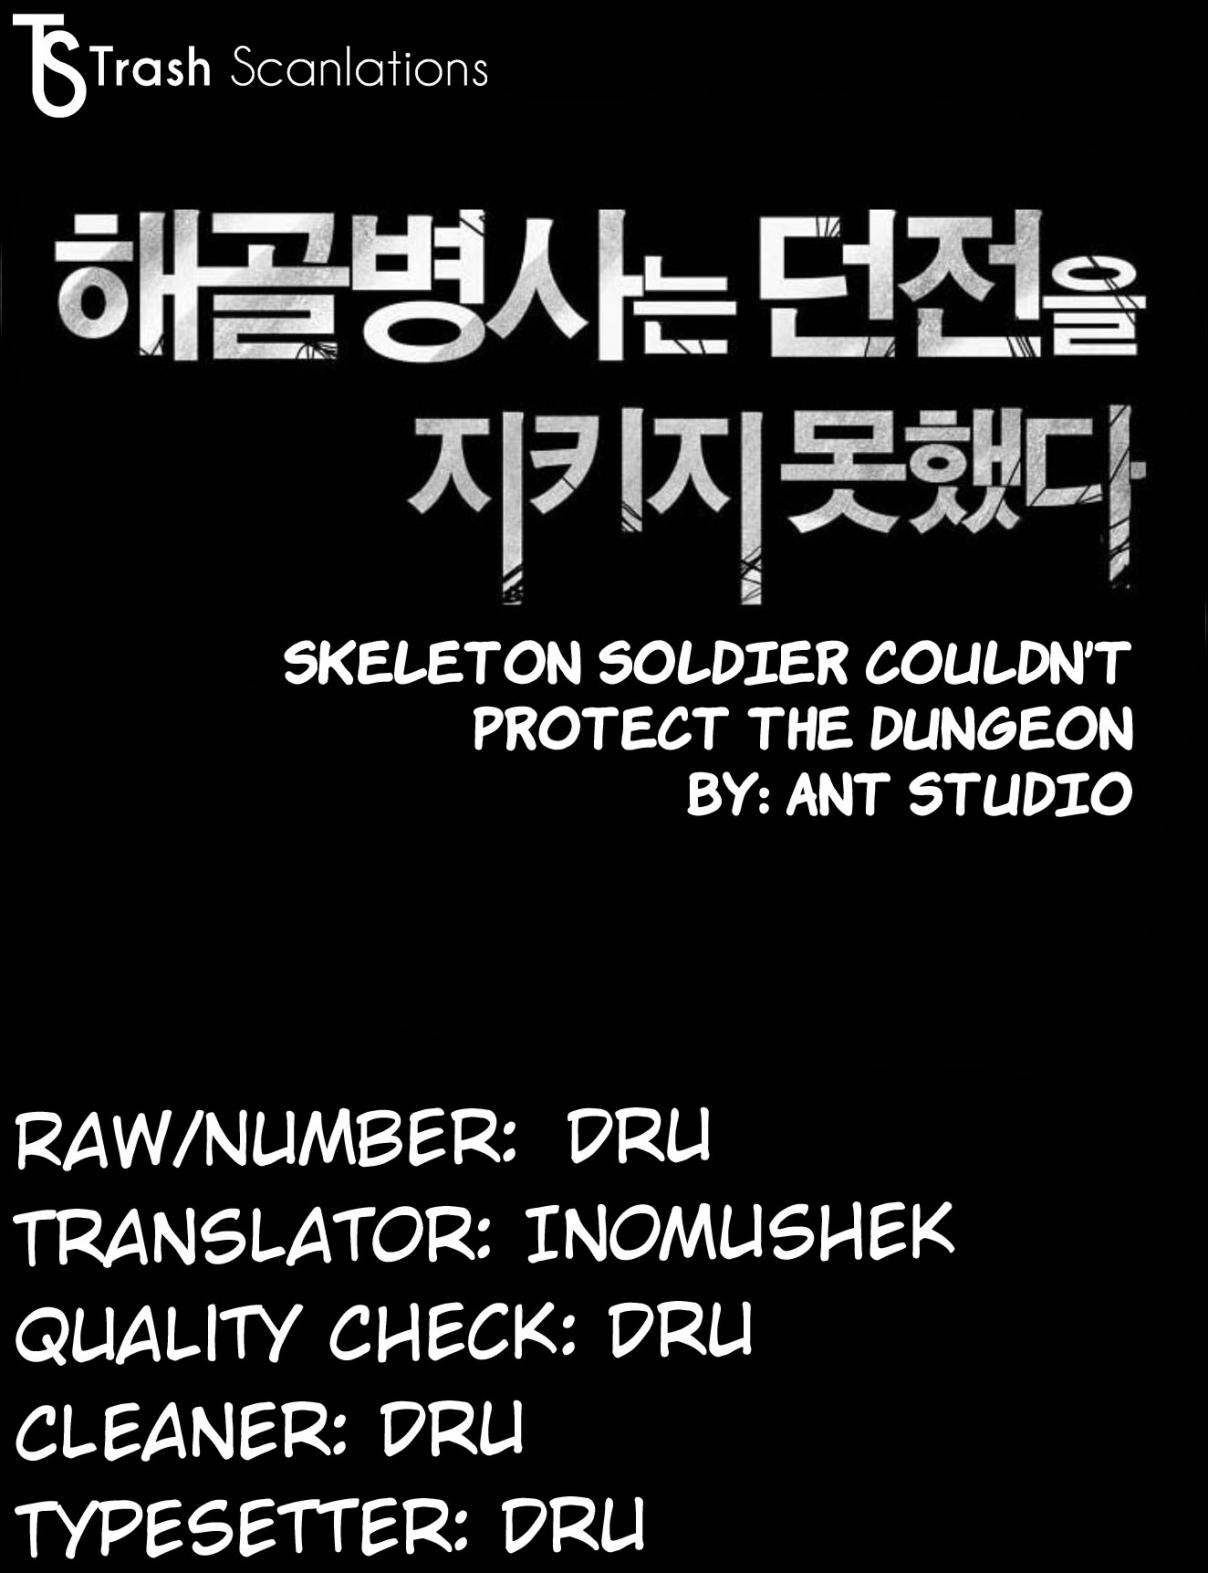 Skeleton Soldier (Skeleton Soldier Couldn’t Protect the Dungeon) Ch. 1